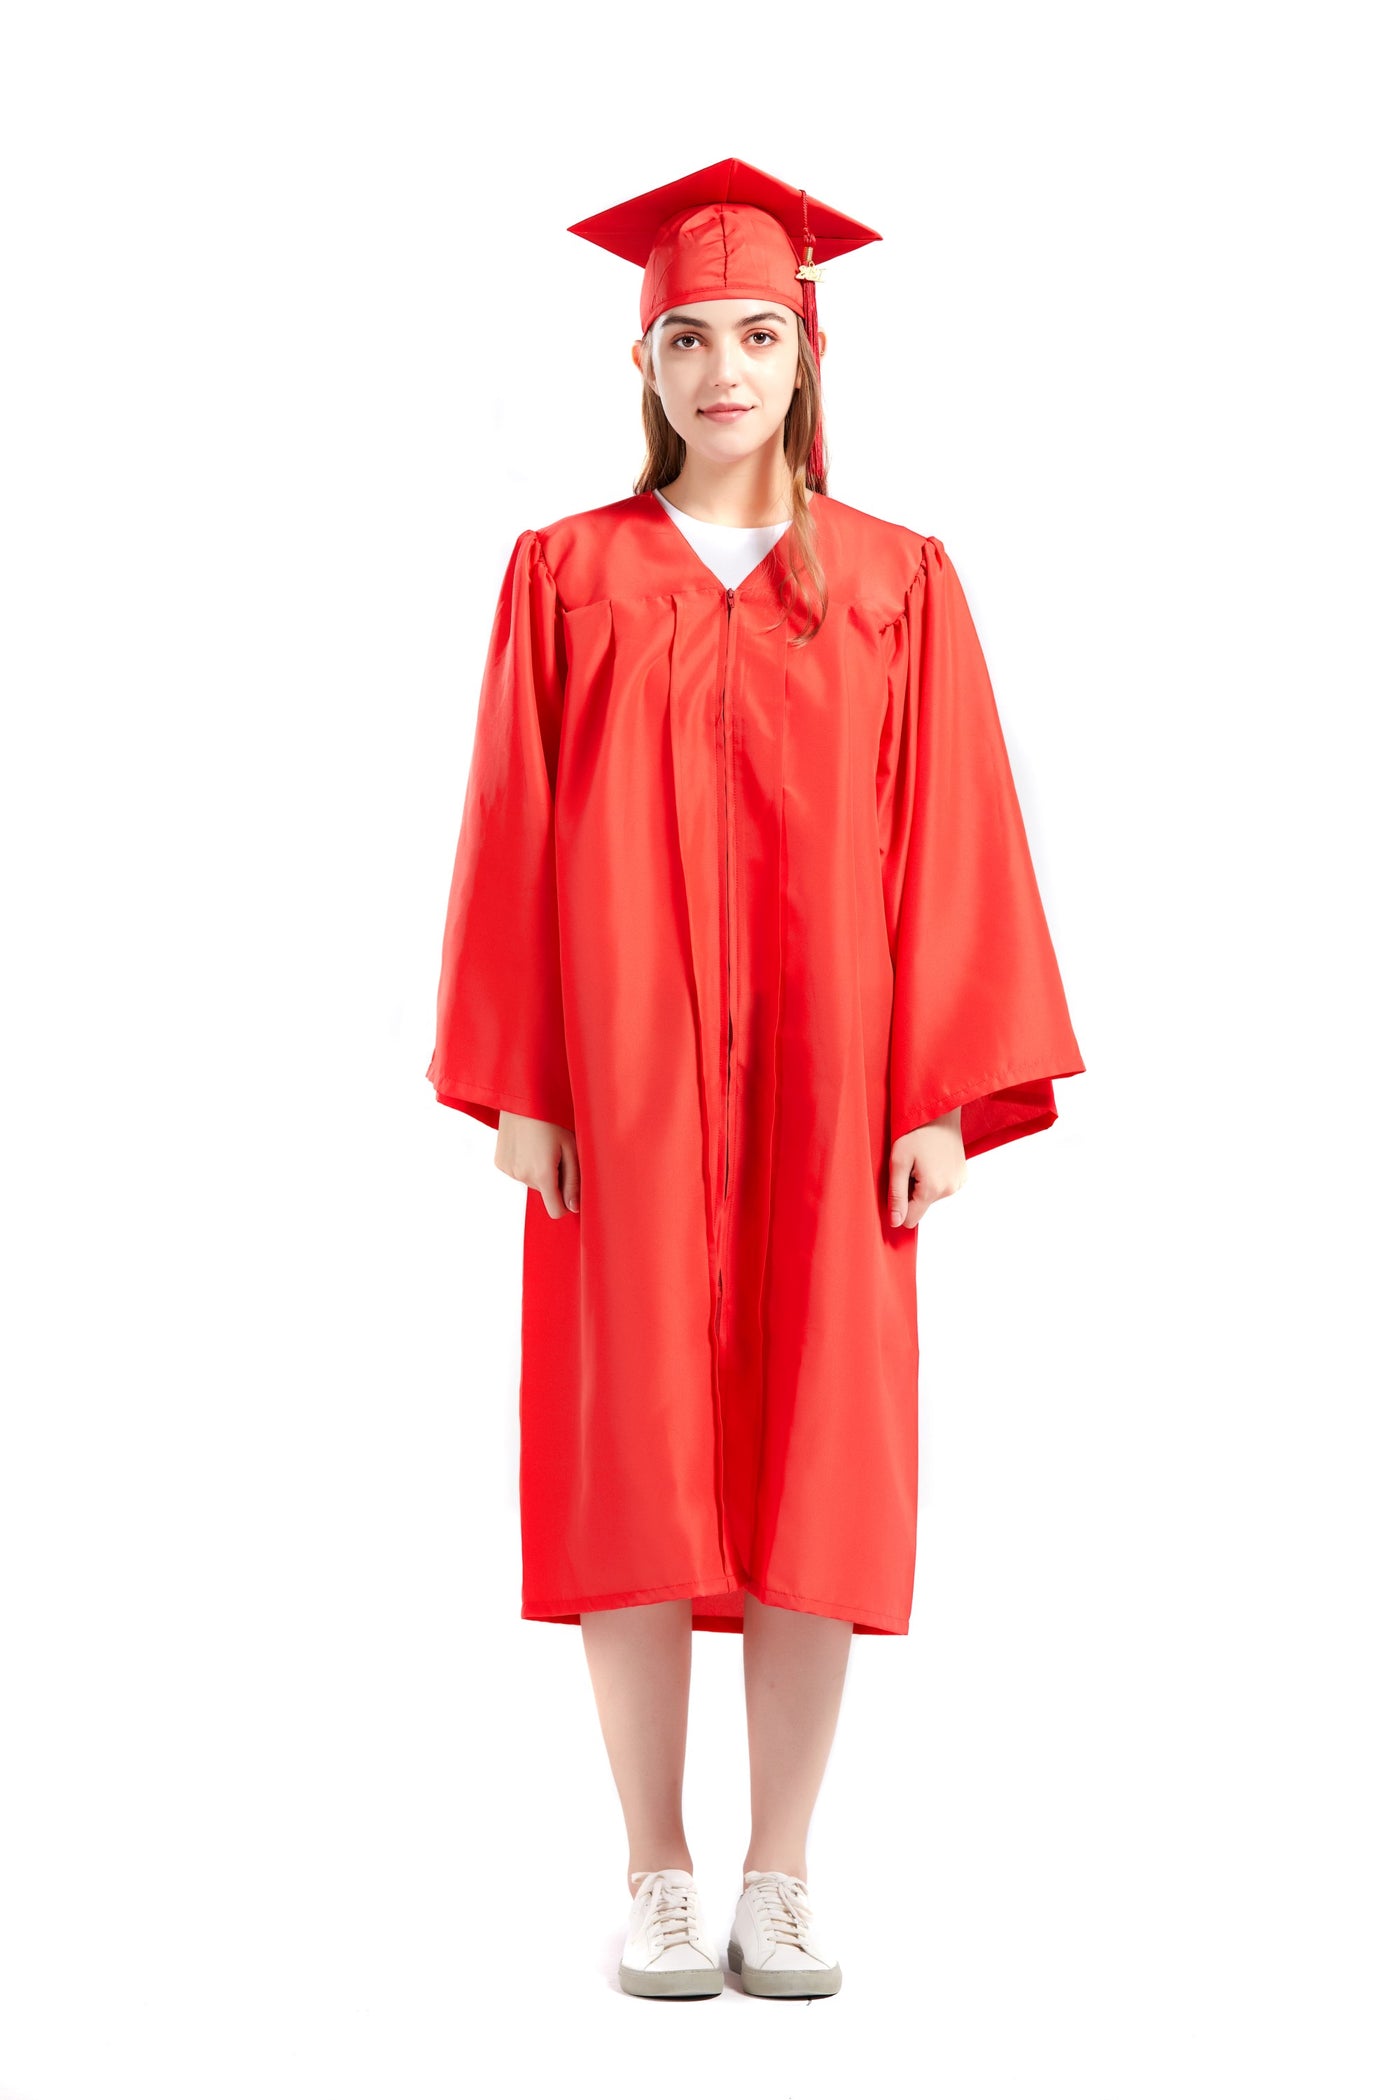 Graduation Cap Gown 2023 & 2022 Year Charm for College or High School Graduates